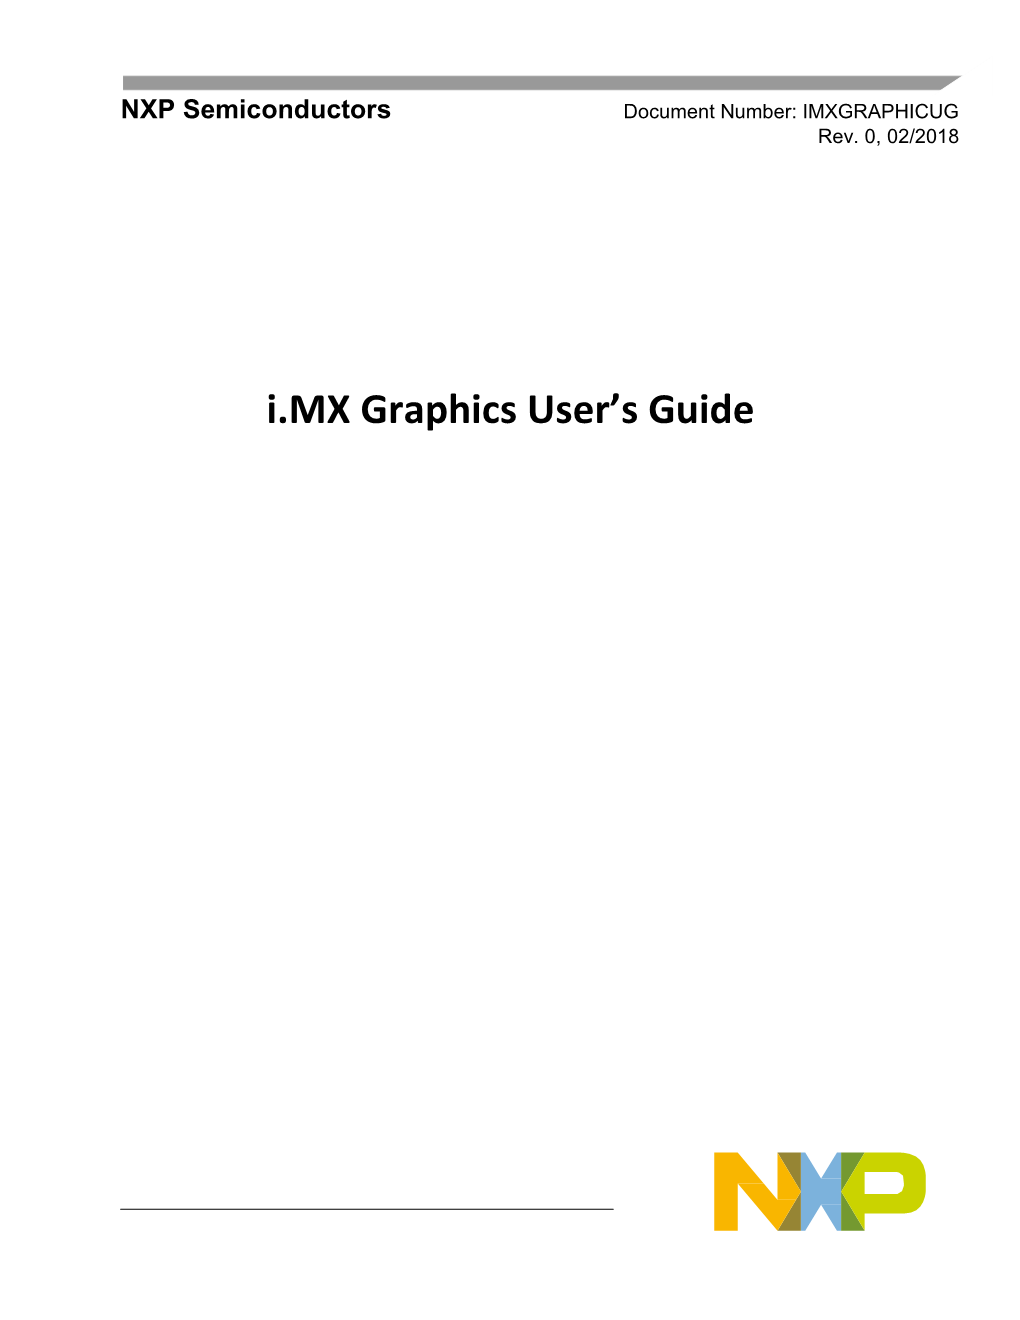 I.MX Graphics Users Guide Android